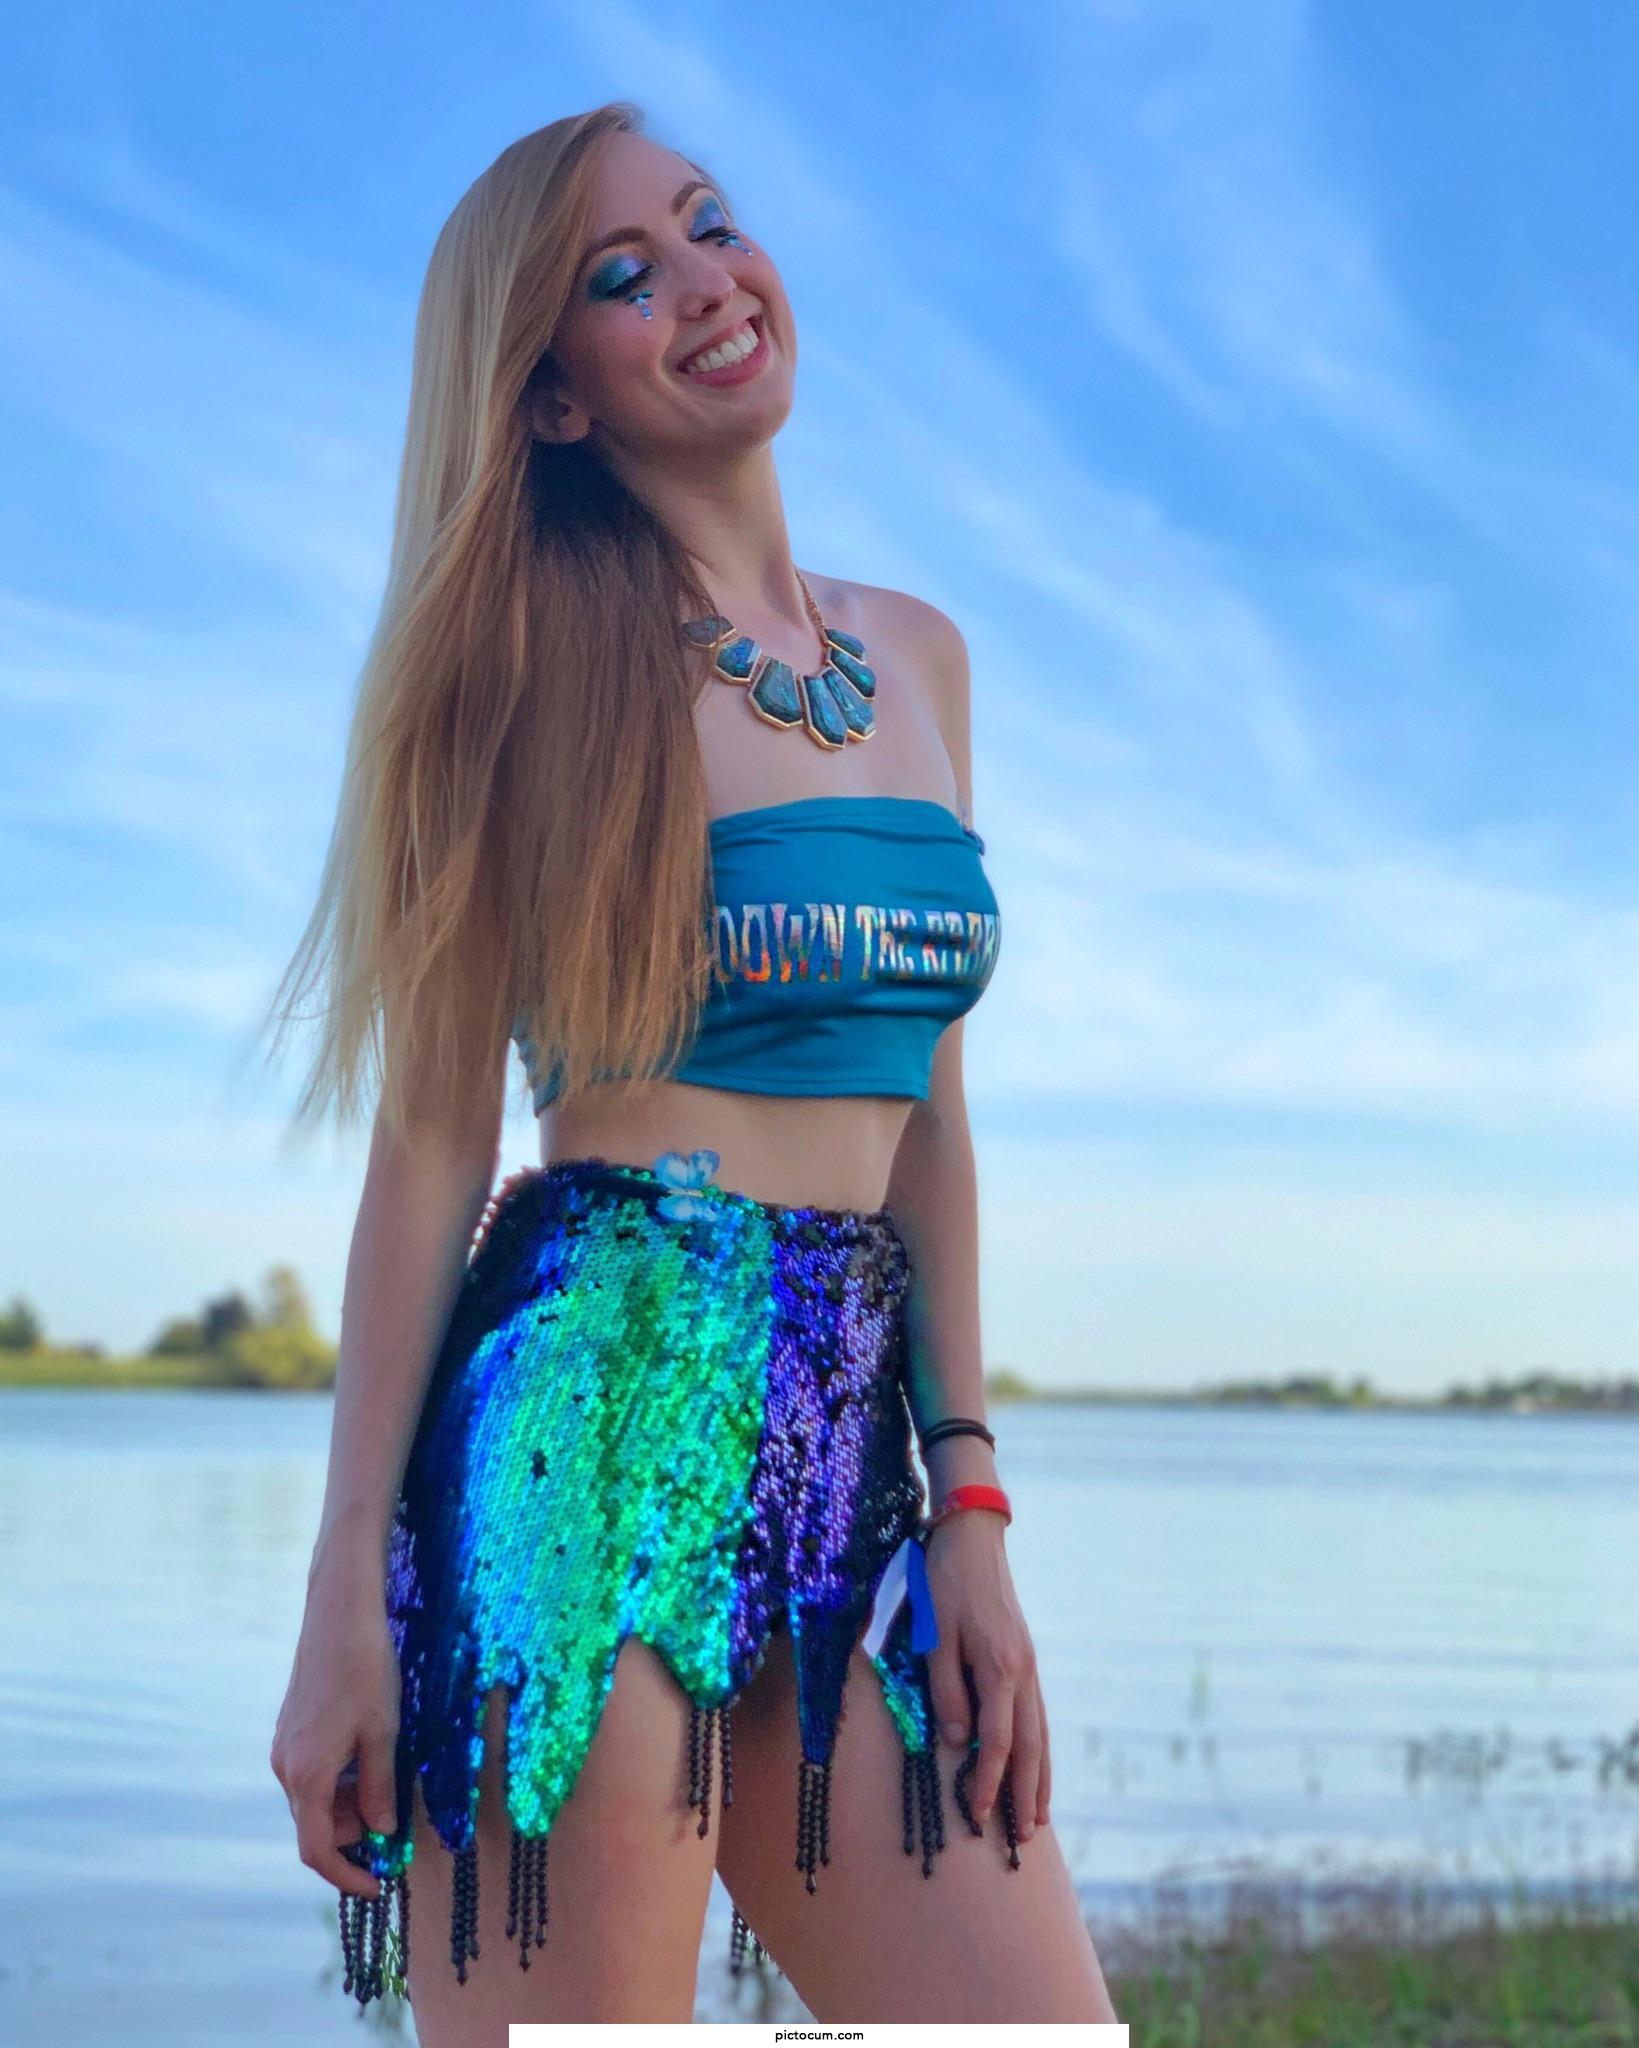 Do you like this festival look?